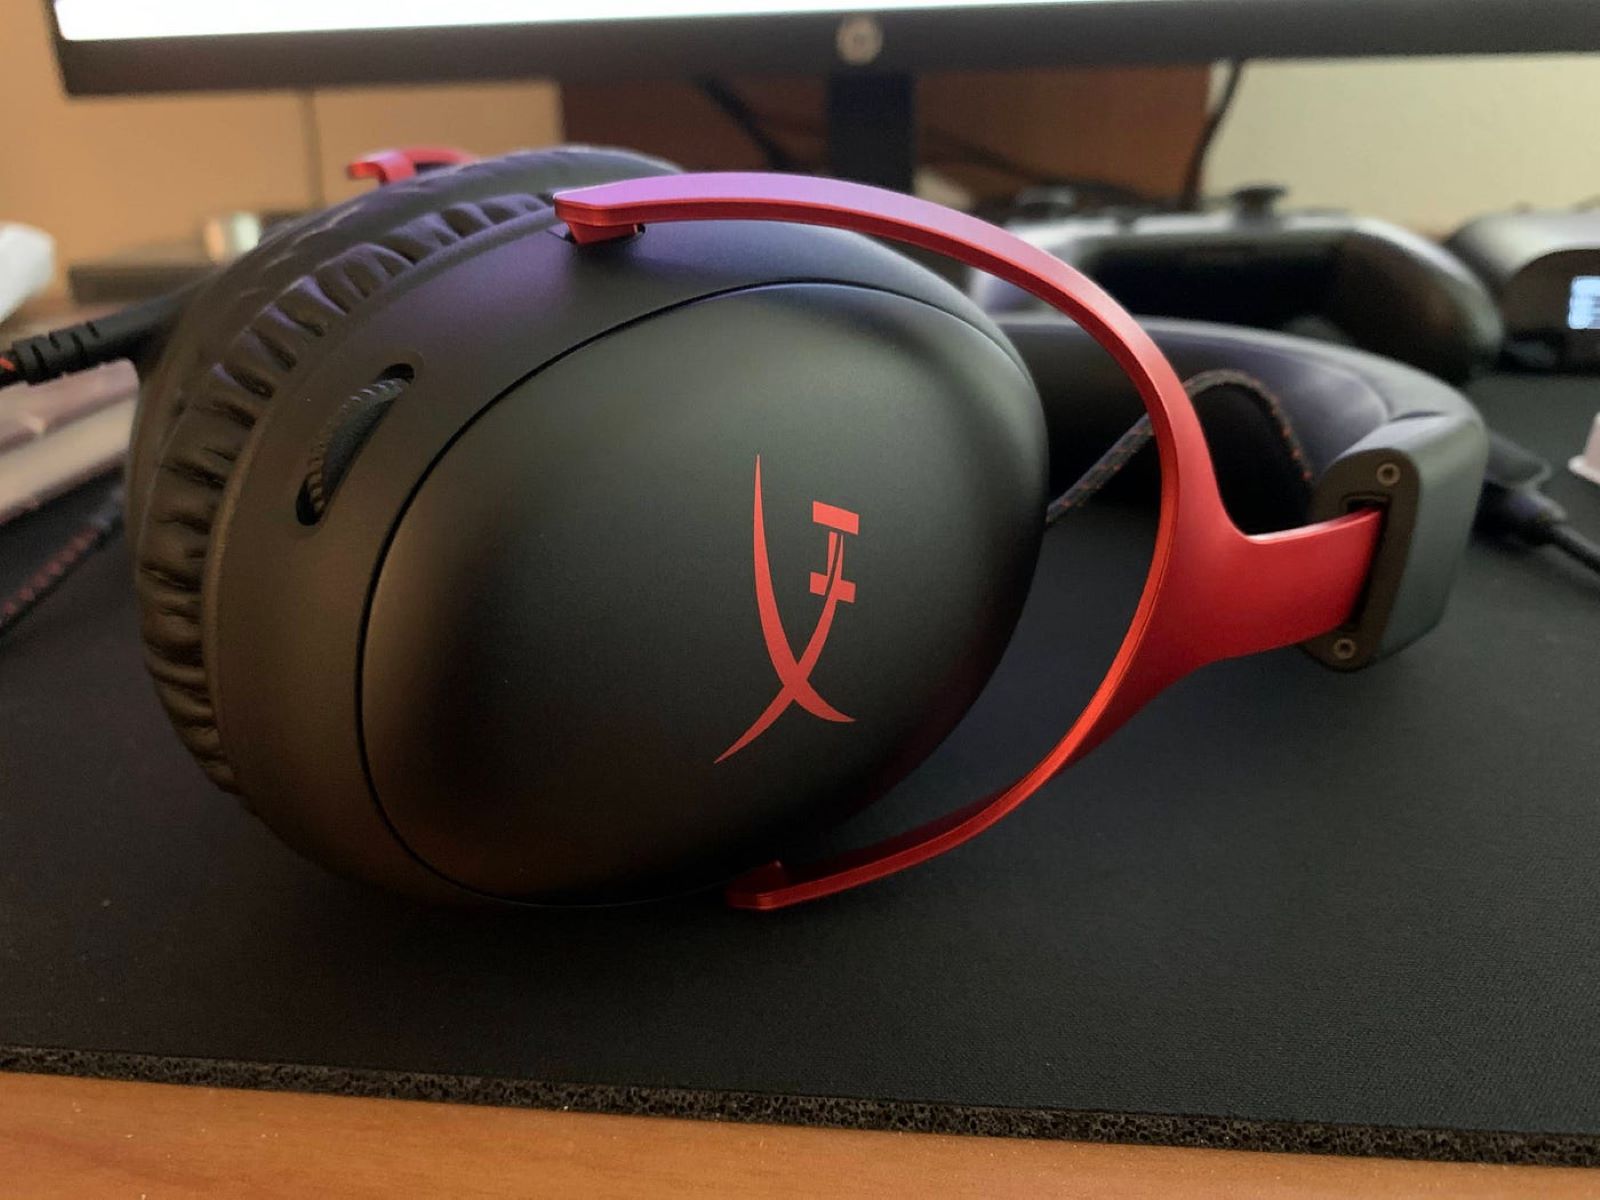 Why Can’t I Hear Behind Myself With The HyperX Cloud Stinger Gaming Headset